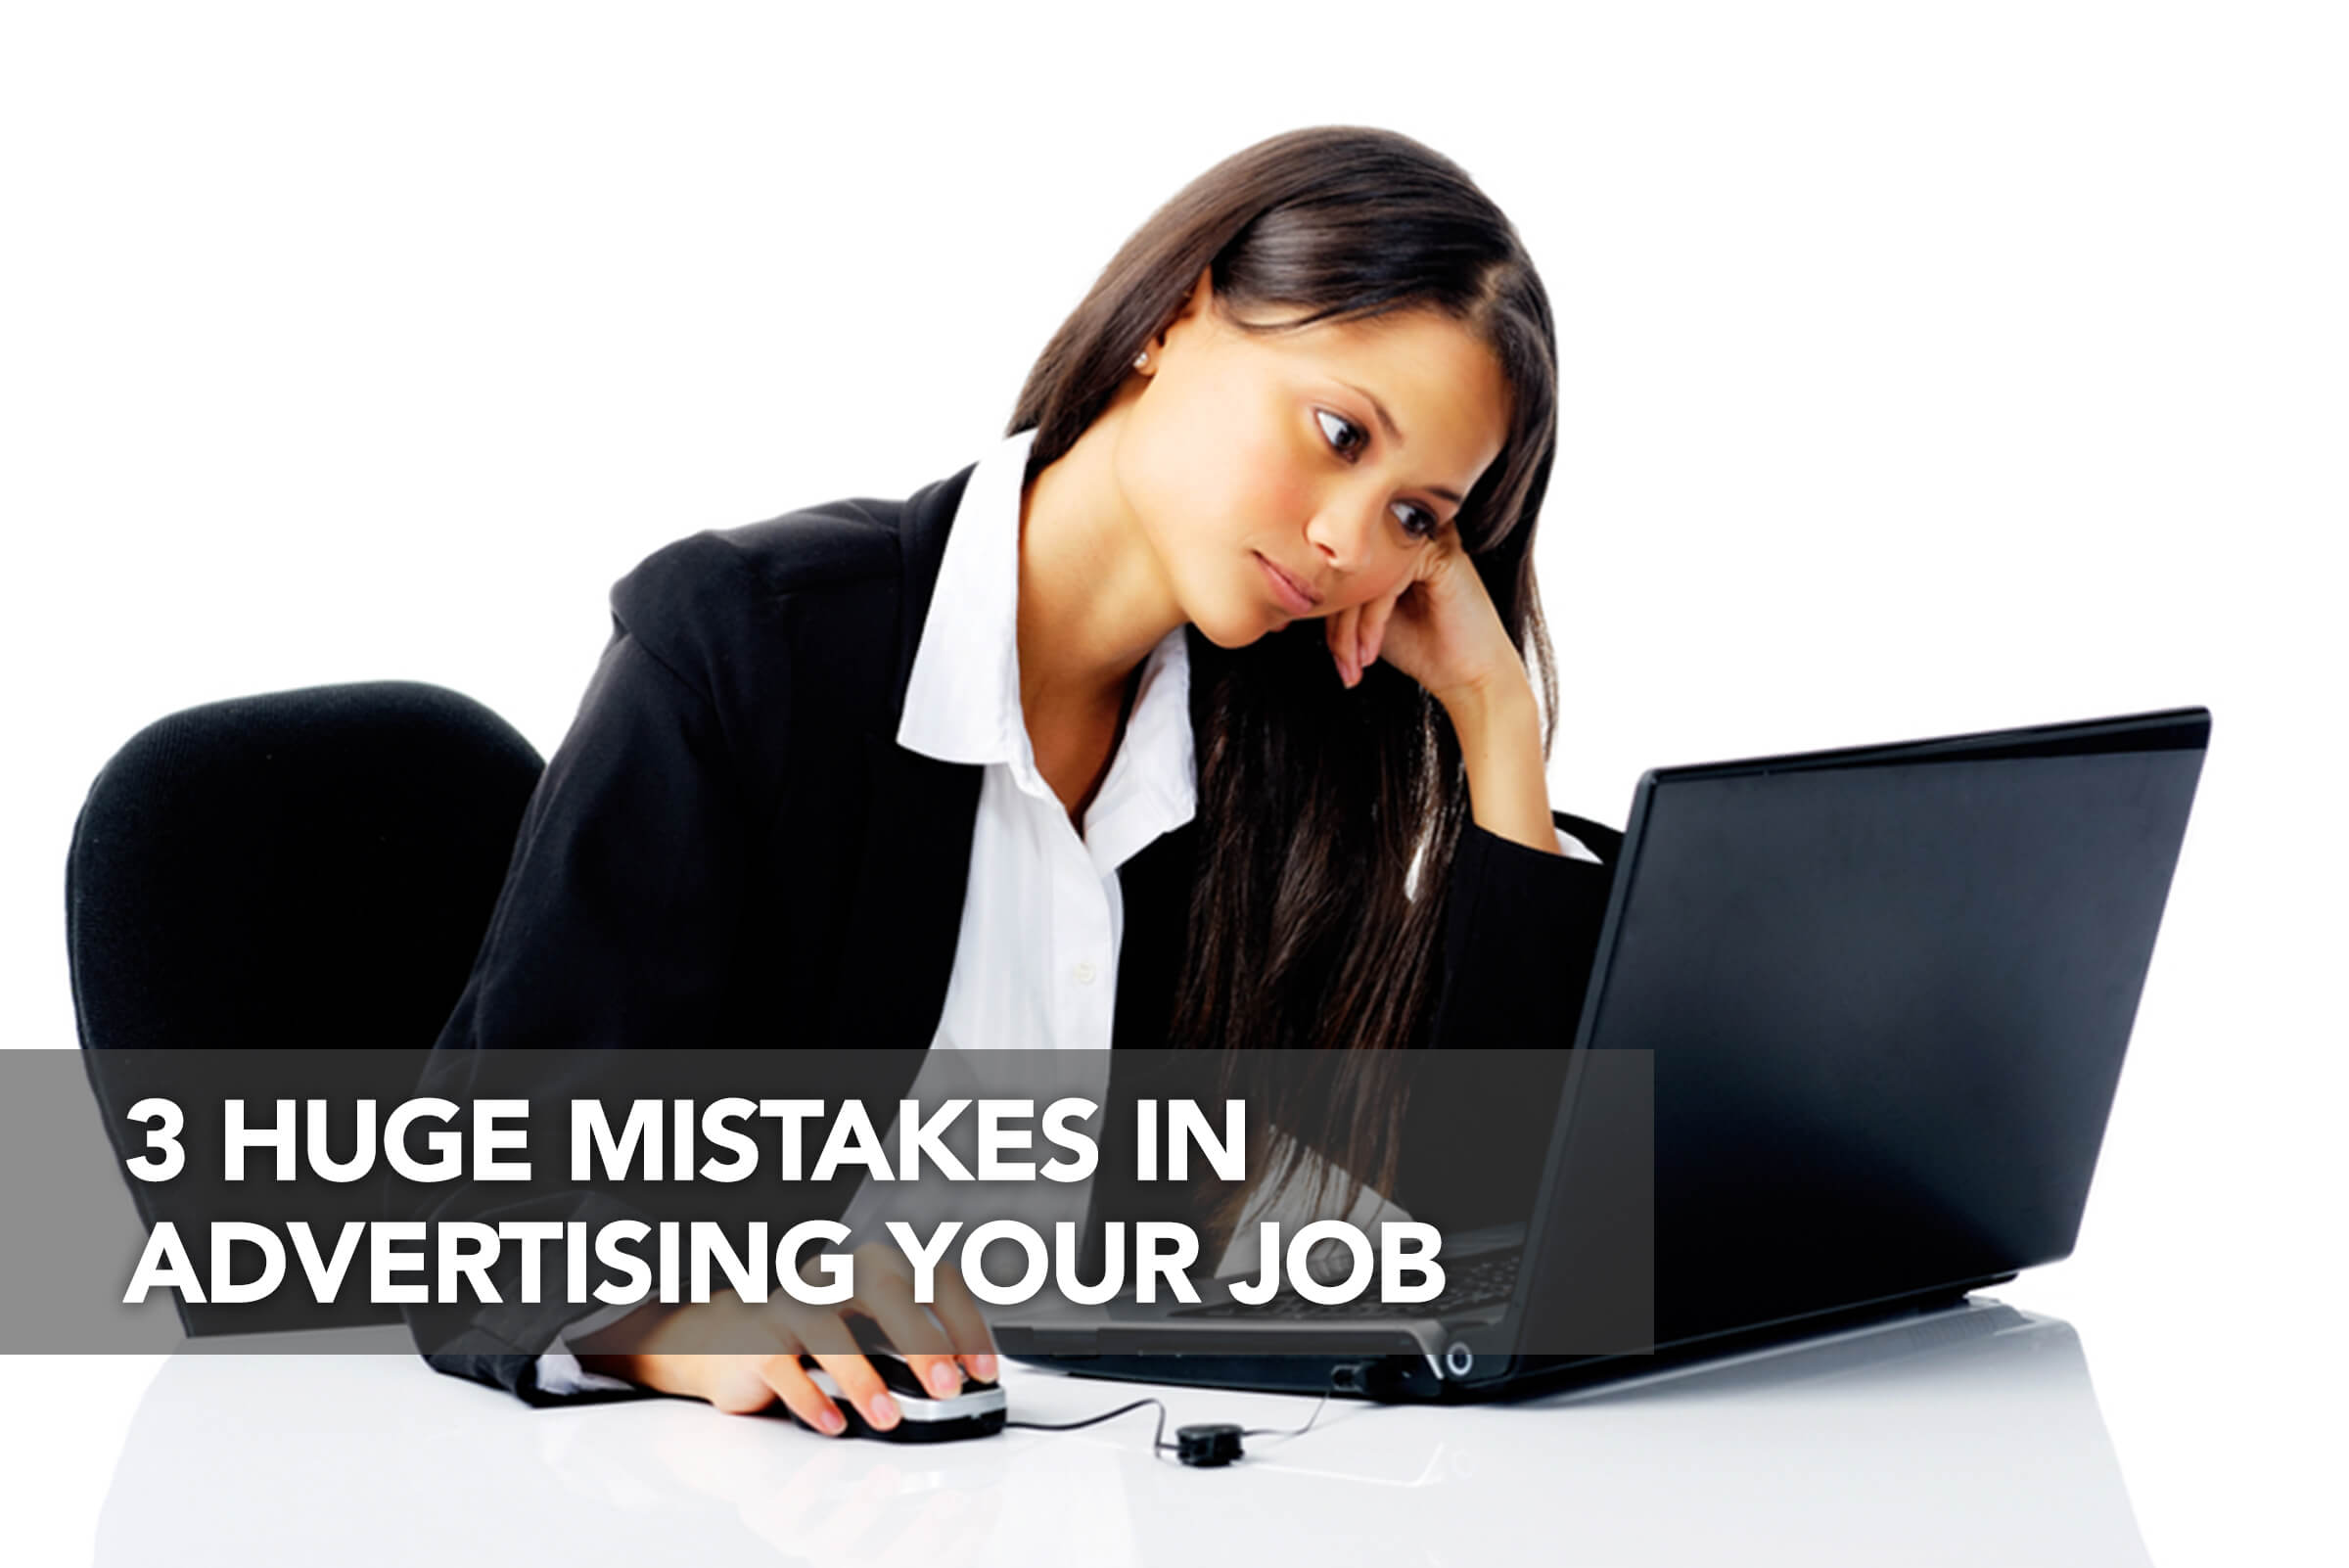 3 Huge Mistakes in Advertising Your Job